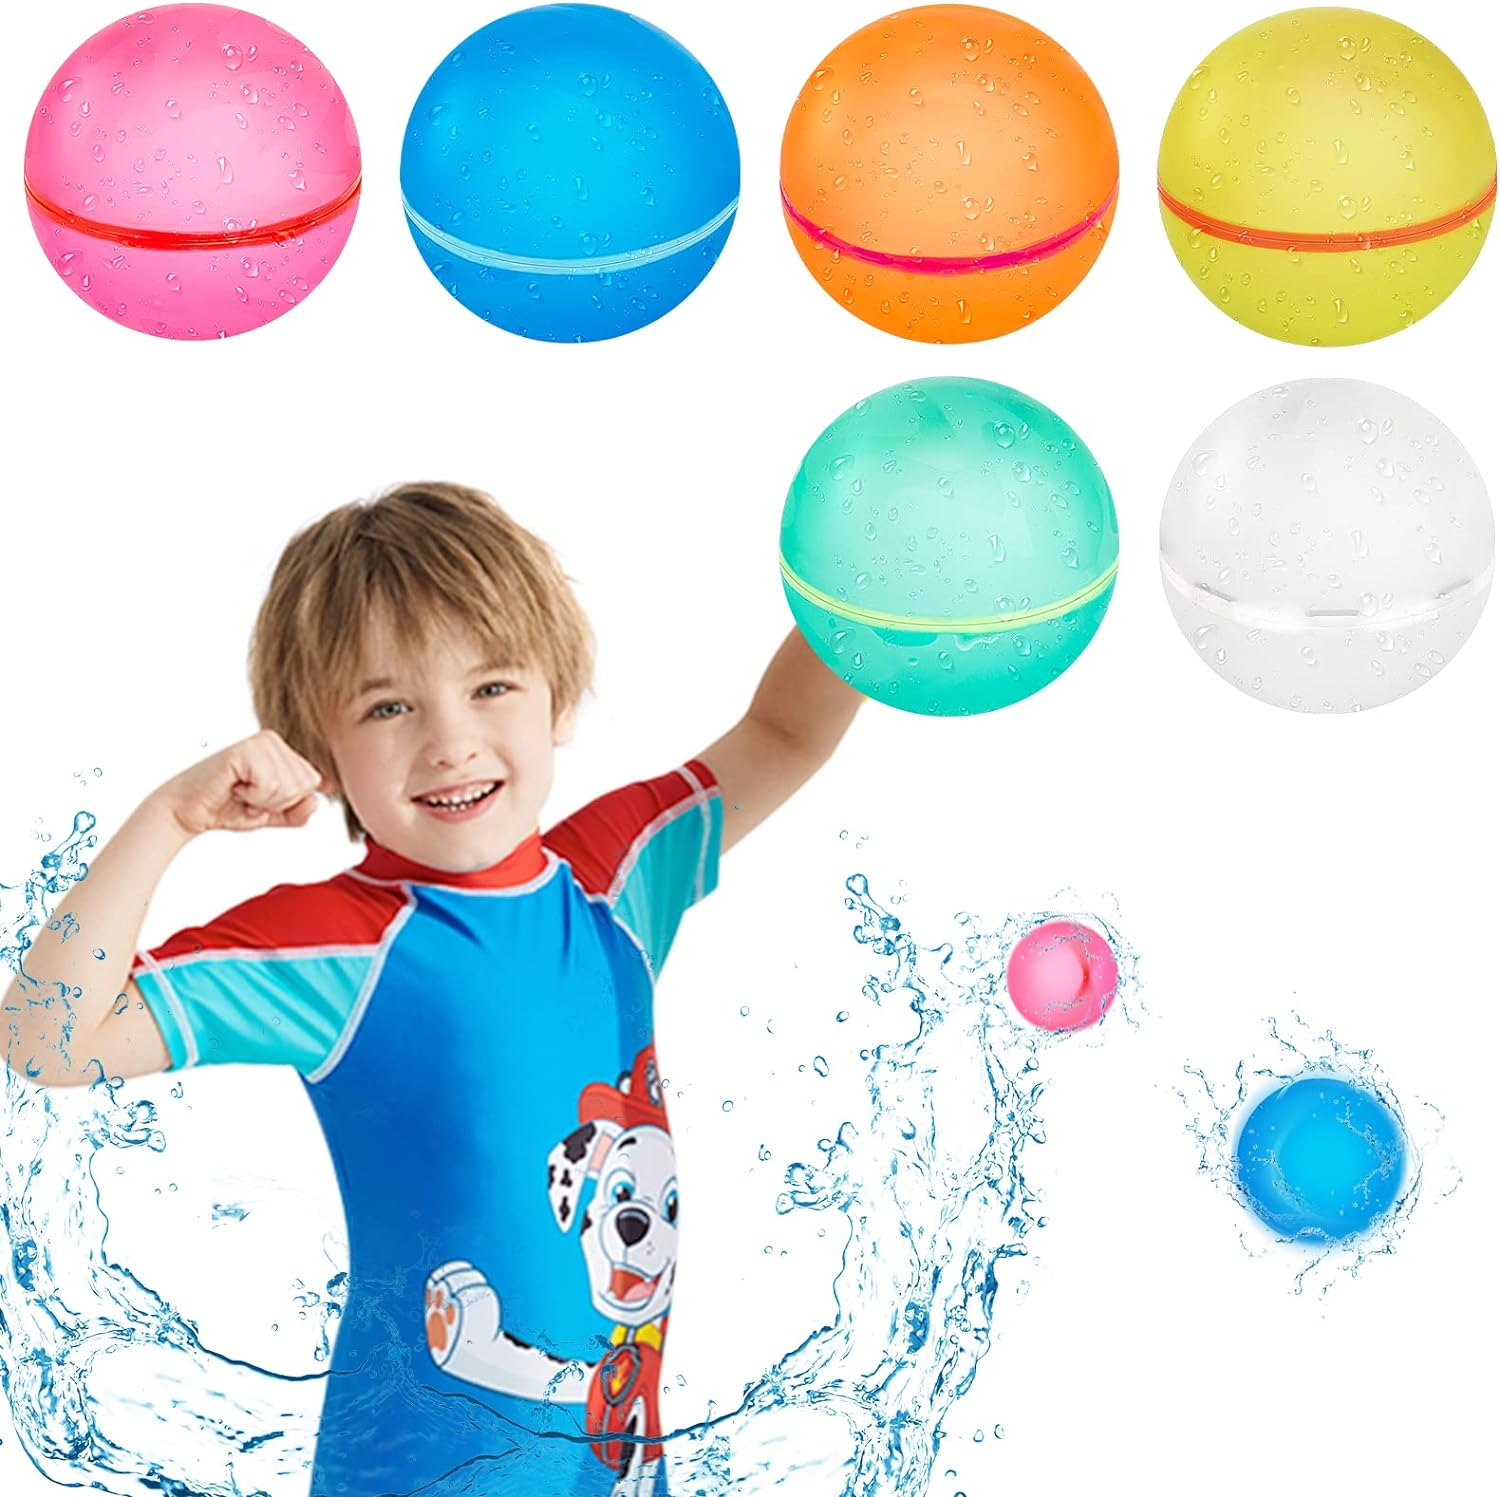 Primary image for Reusable Water Balloons for Kids Water Bombs Splash Balls for Pool,Summer, 6 PCS